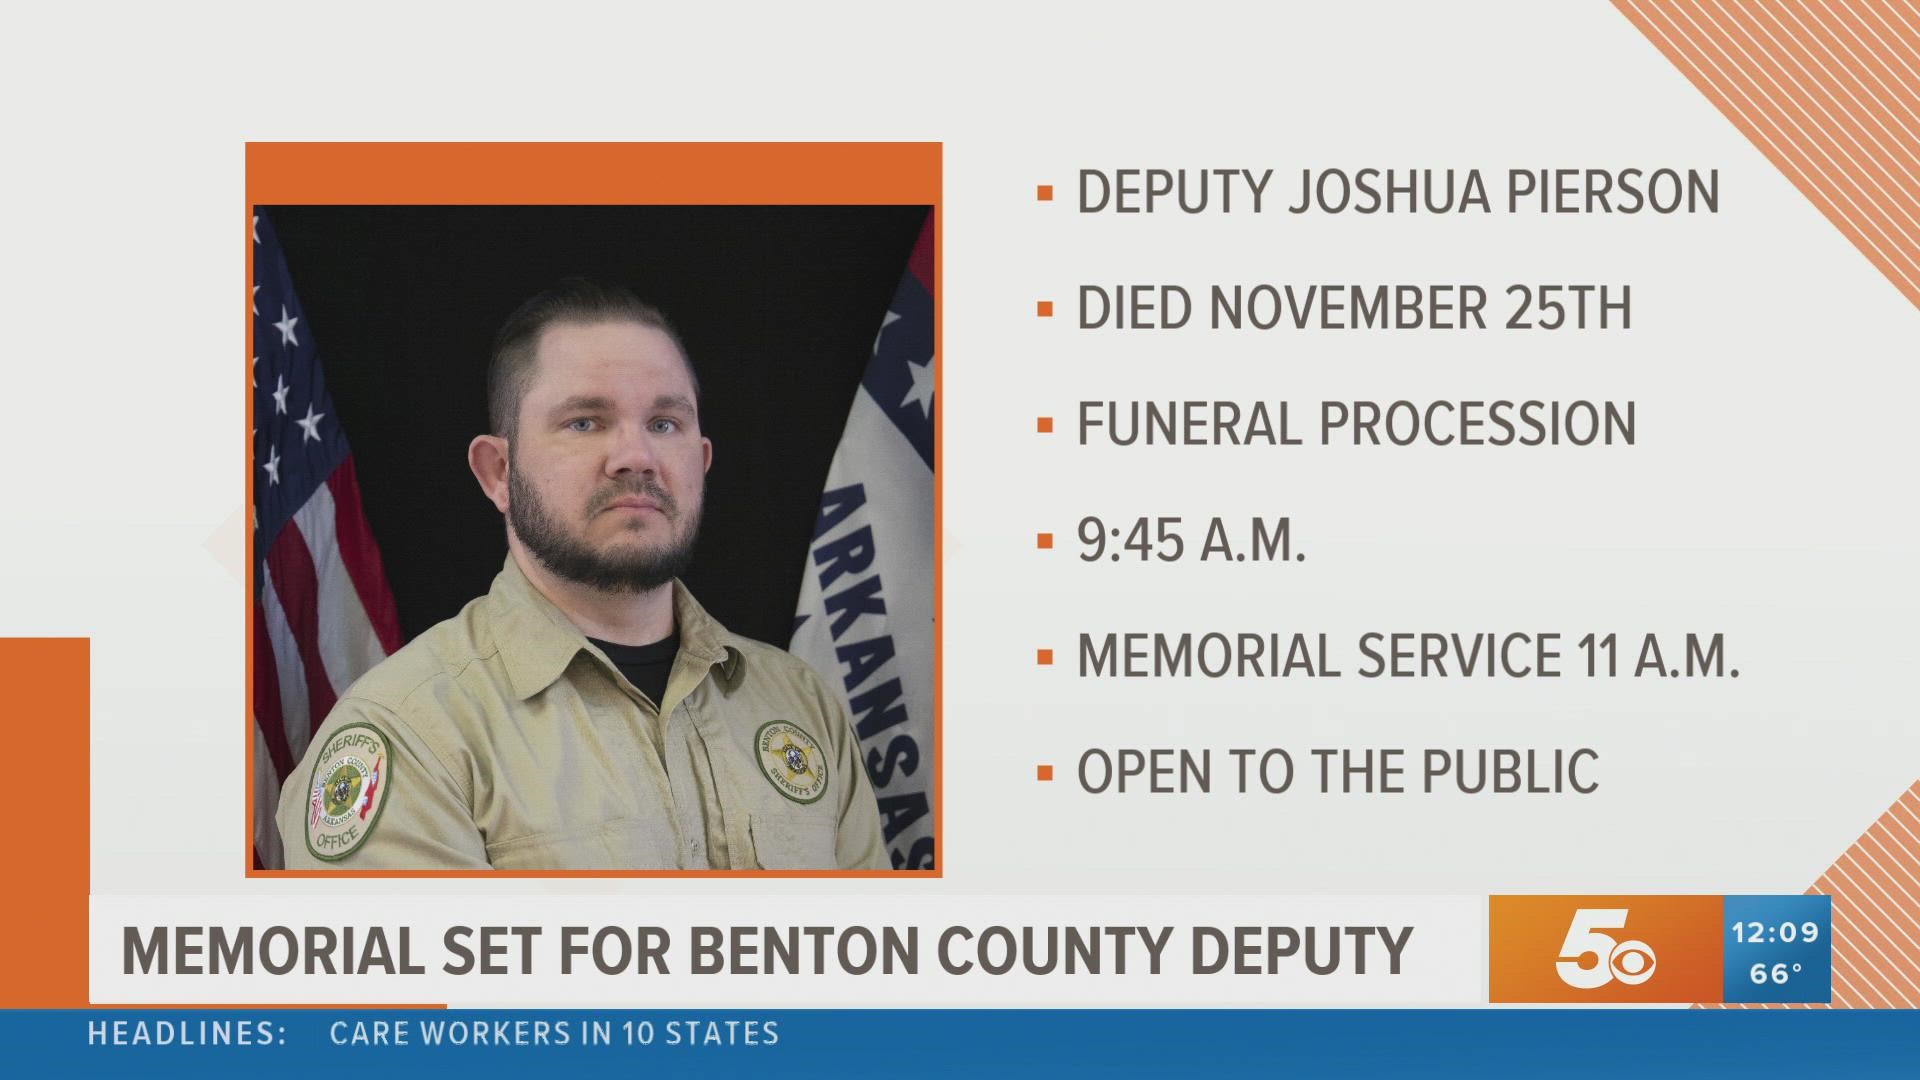 Deputy Joshua Pierson had been with the Benton County Sheriff's Office for over a decade. https://bit.ly/3o6TJ7P